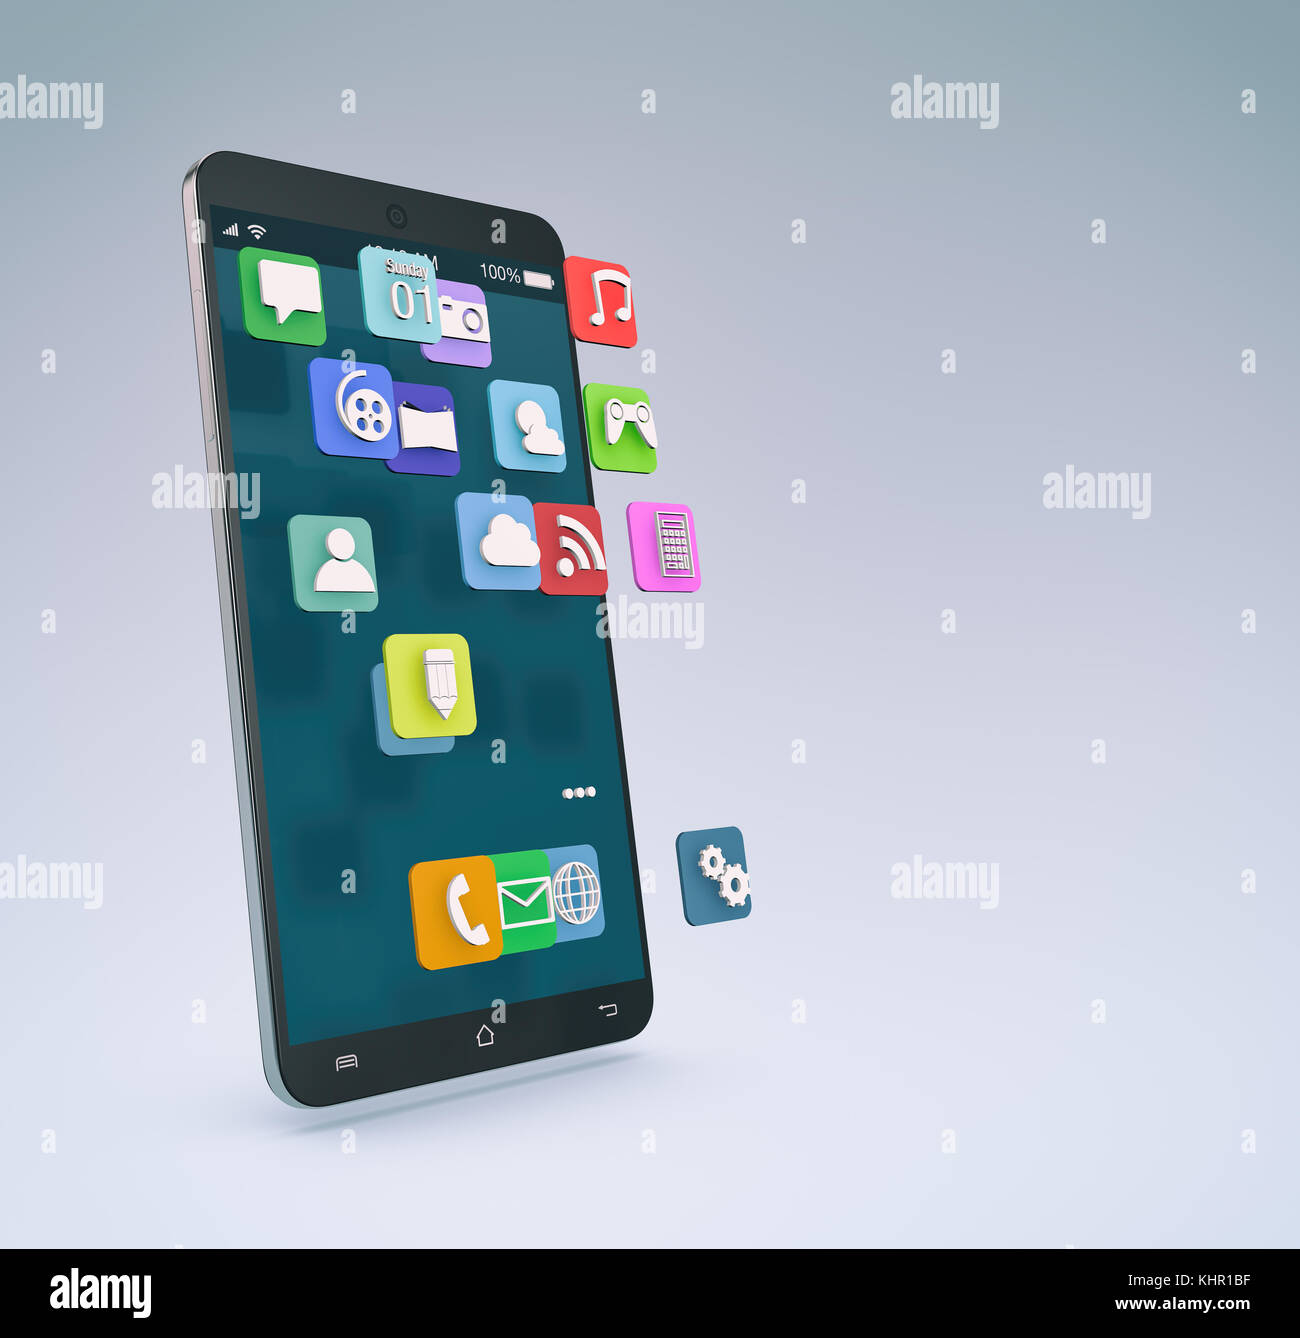 Phone With Icons That Come Out Of The Screen 3d Render Stock Photo Alamy